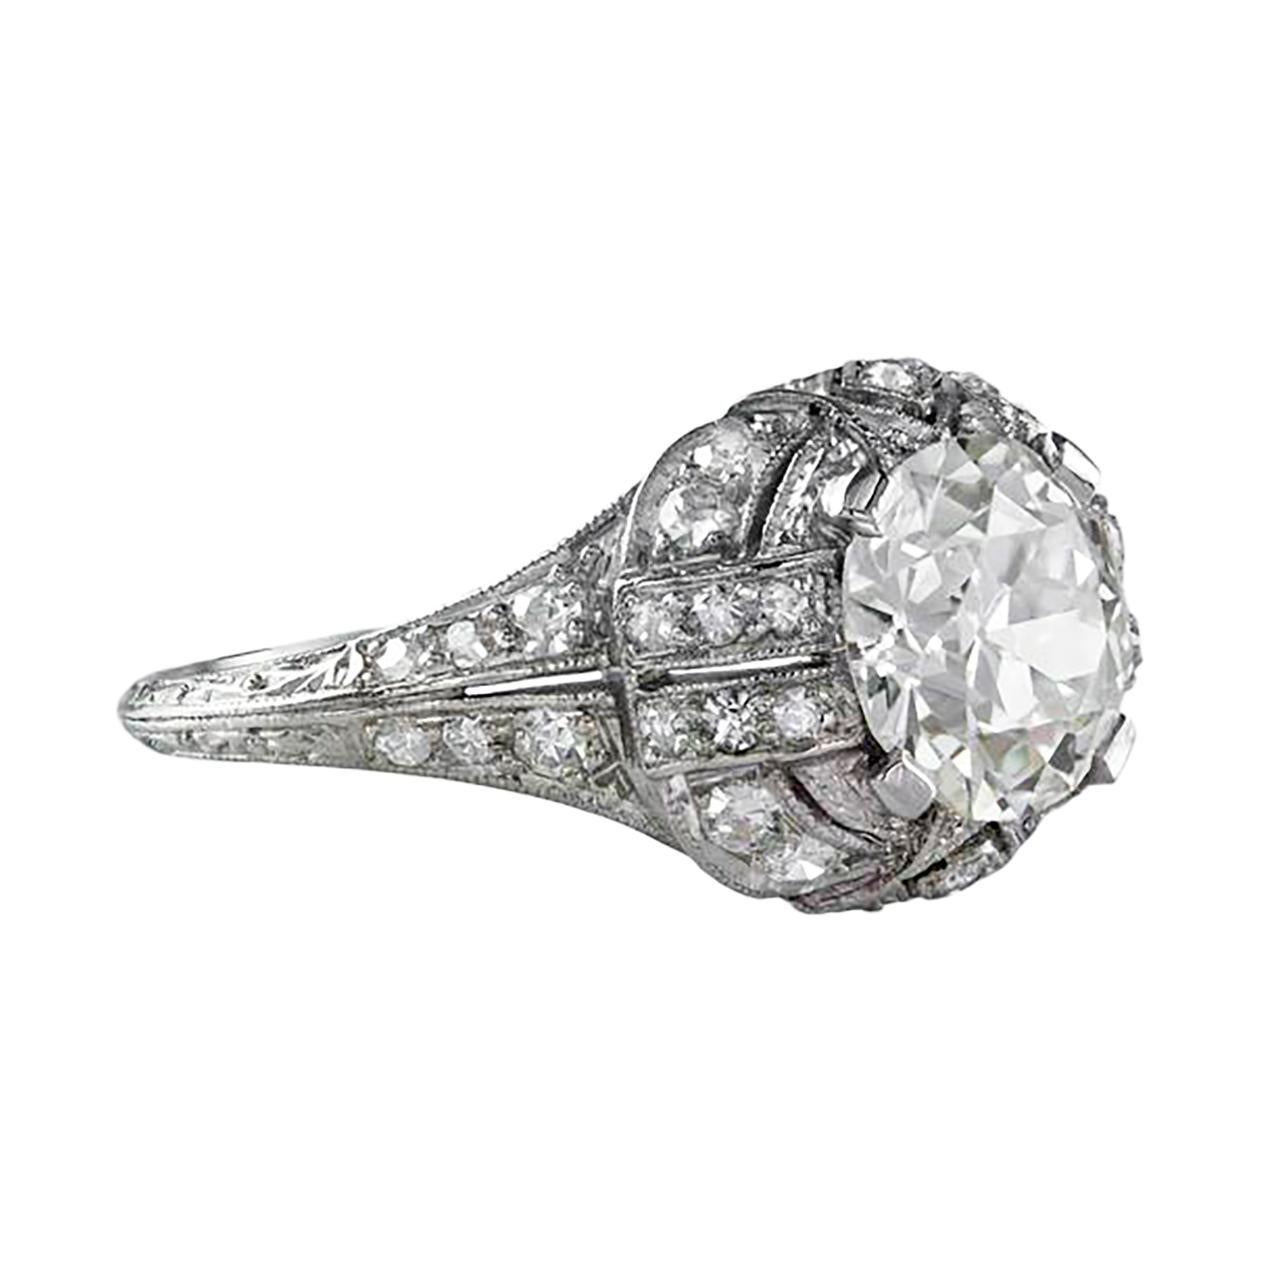 This antique engagement ring features a brilliant round diamond center stone weighing 1.97 carats certified by GIA as M color and VS1 in clarity, set in a platinum four prong setting. Accented by 34 brilliant round diamonds weighing 0.35 carats